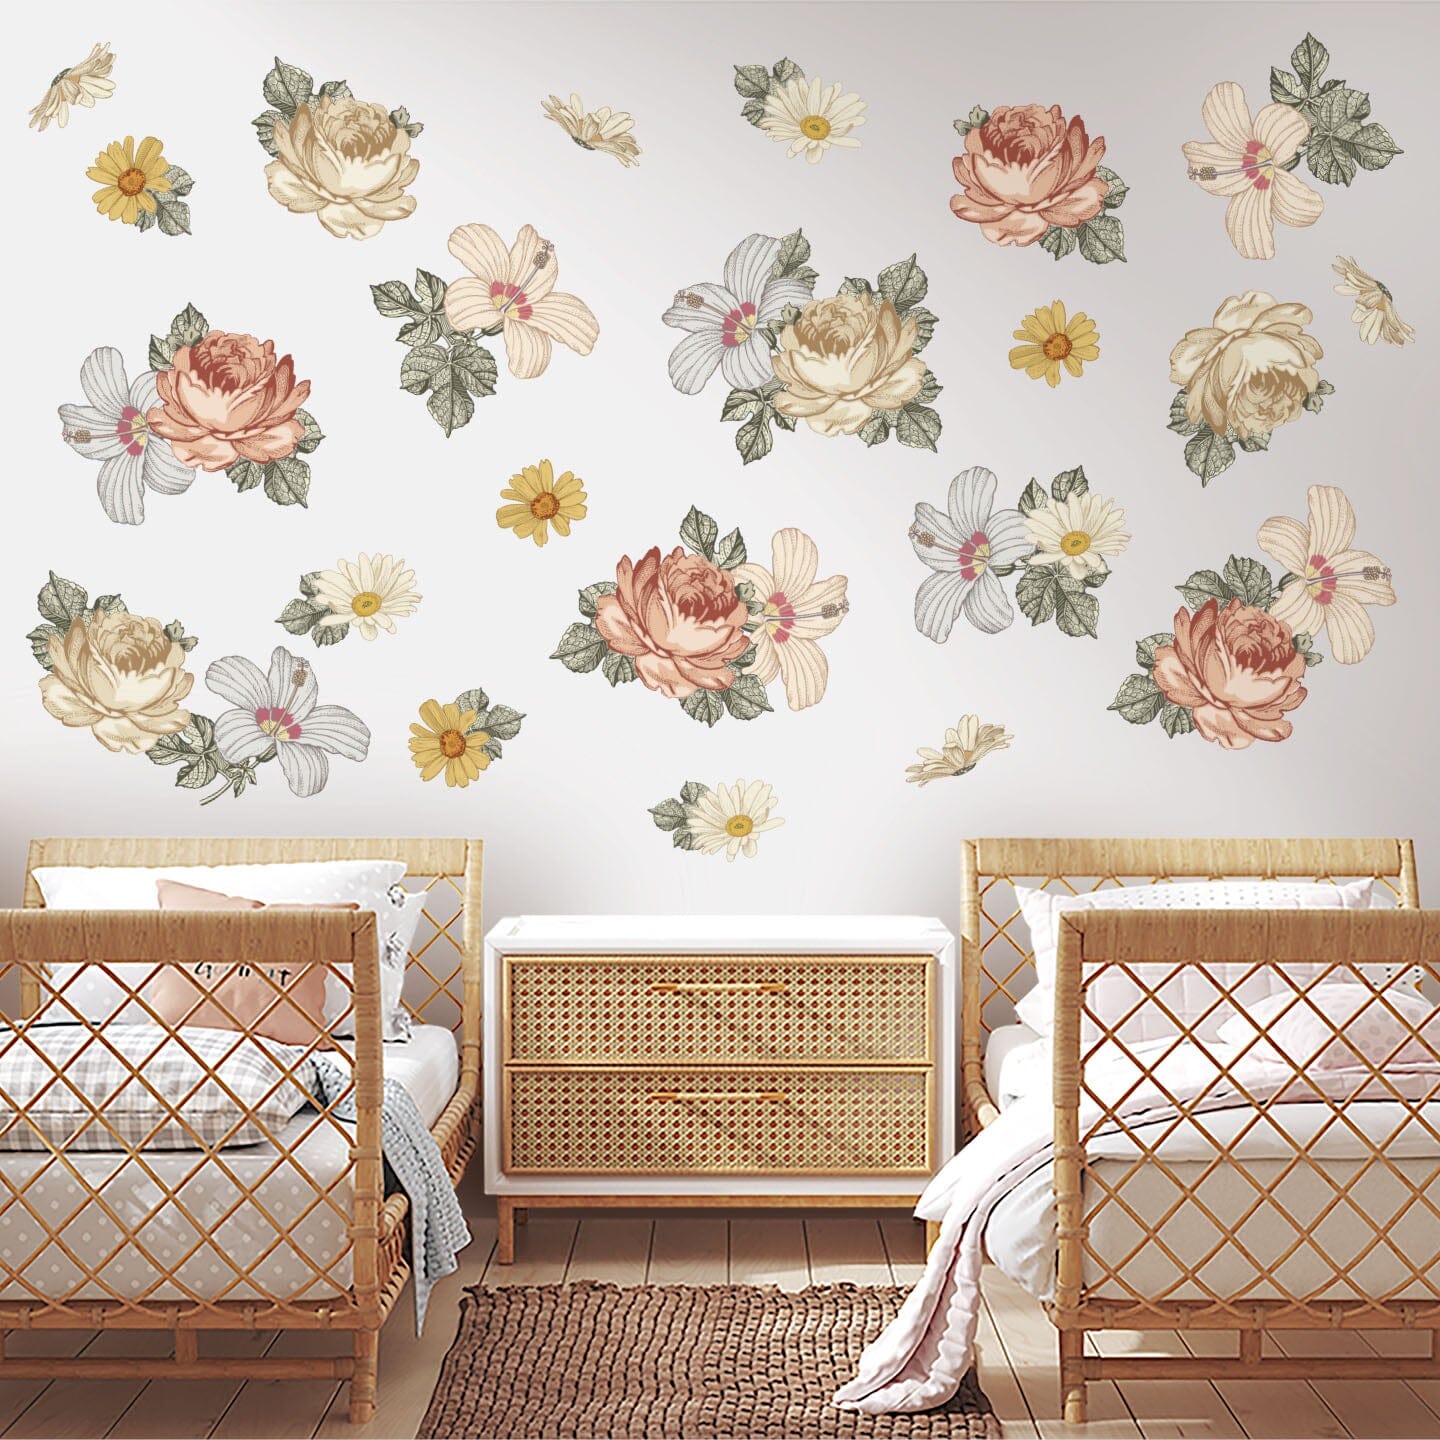 Vintage Floral Collection Peel and Stick Wall Decal Stickers - Set of 4  Sheets